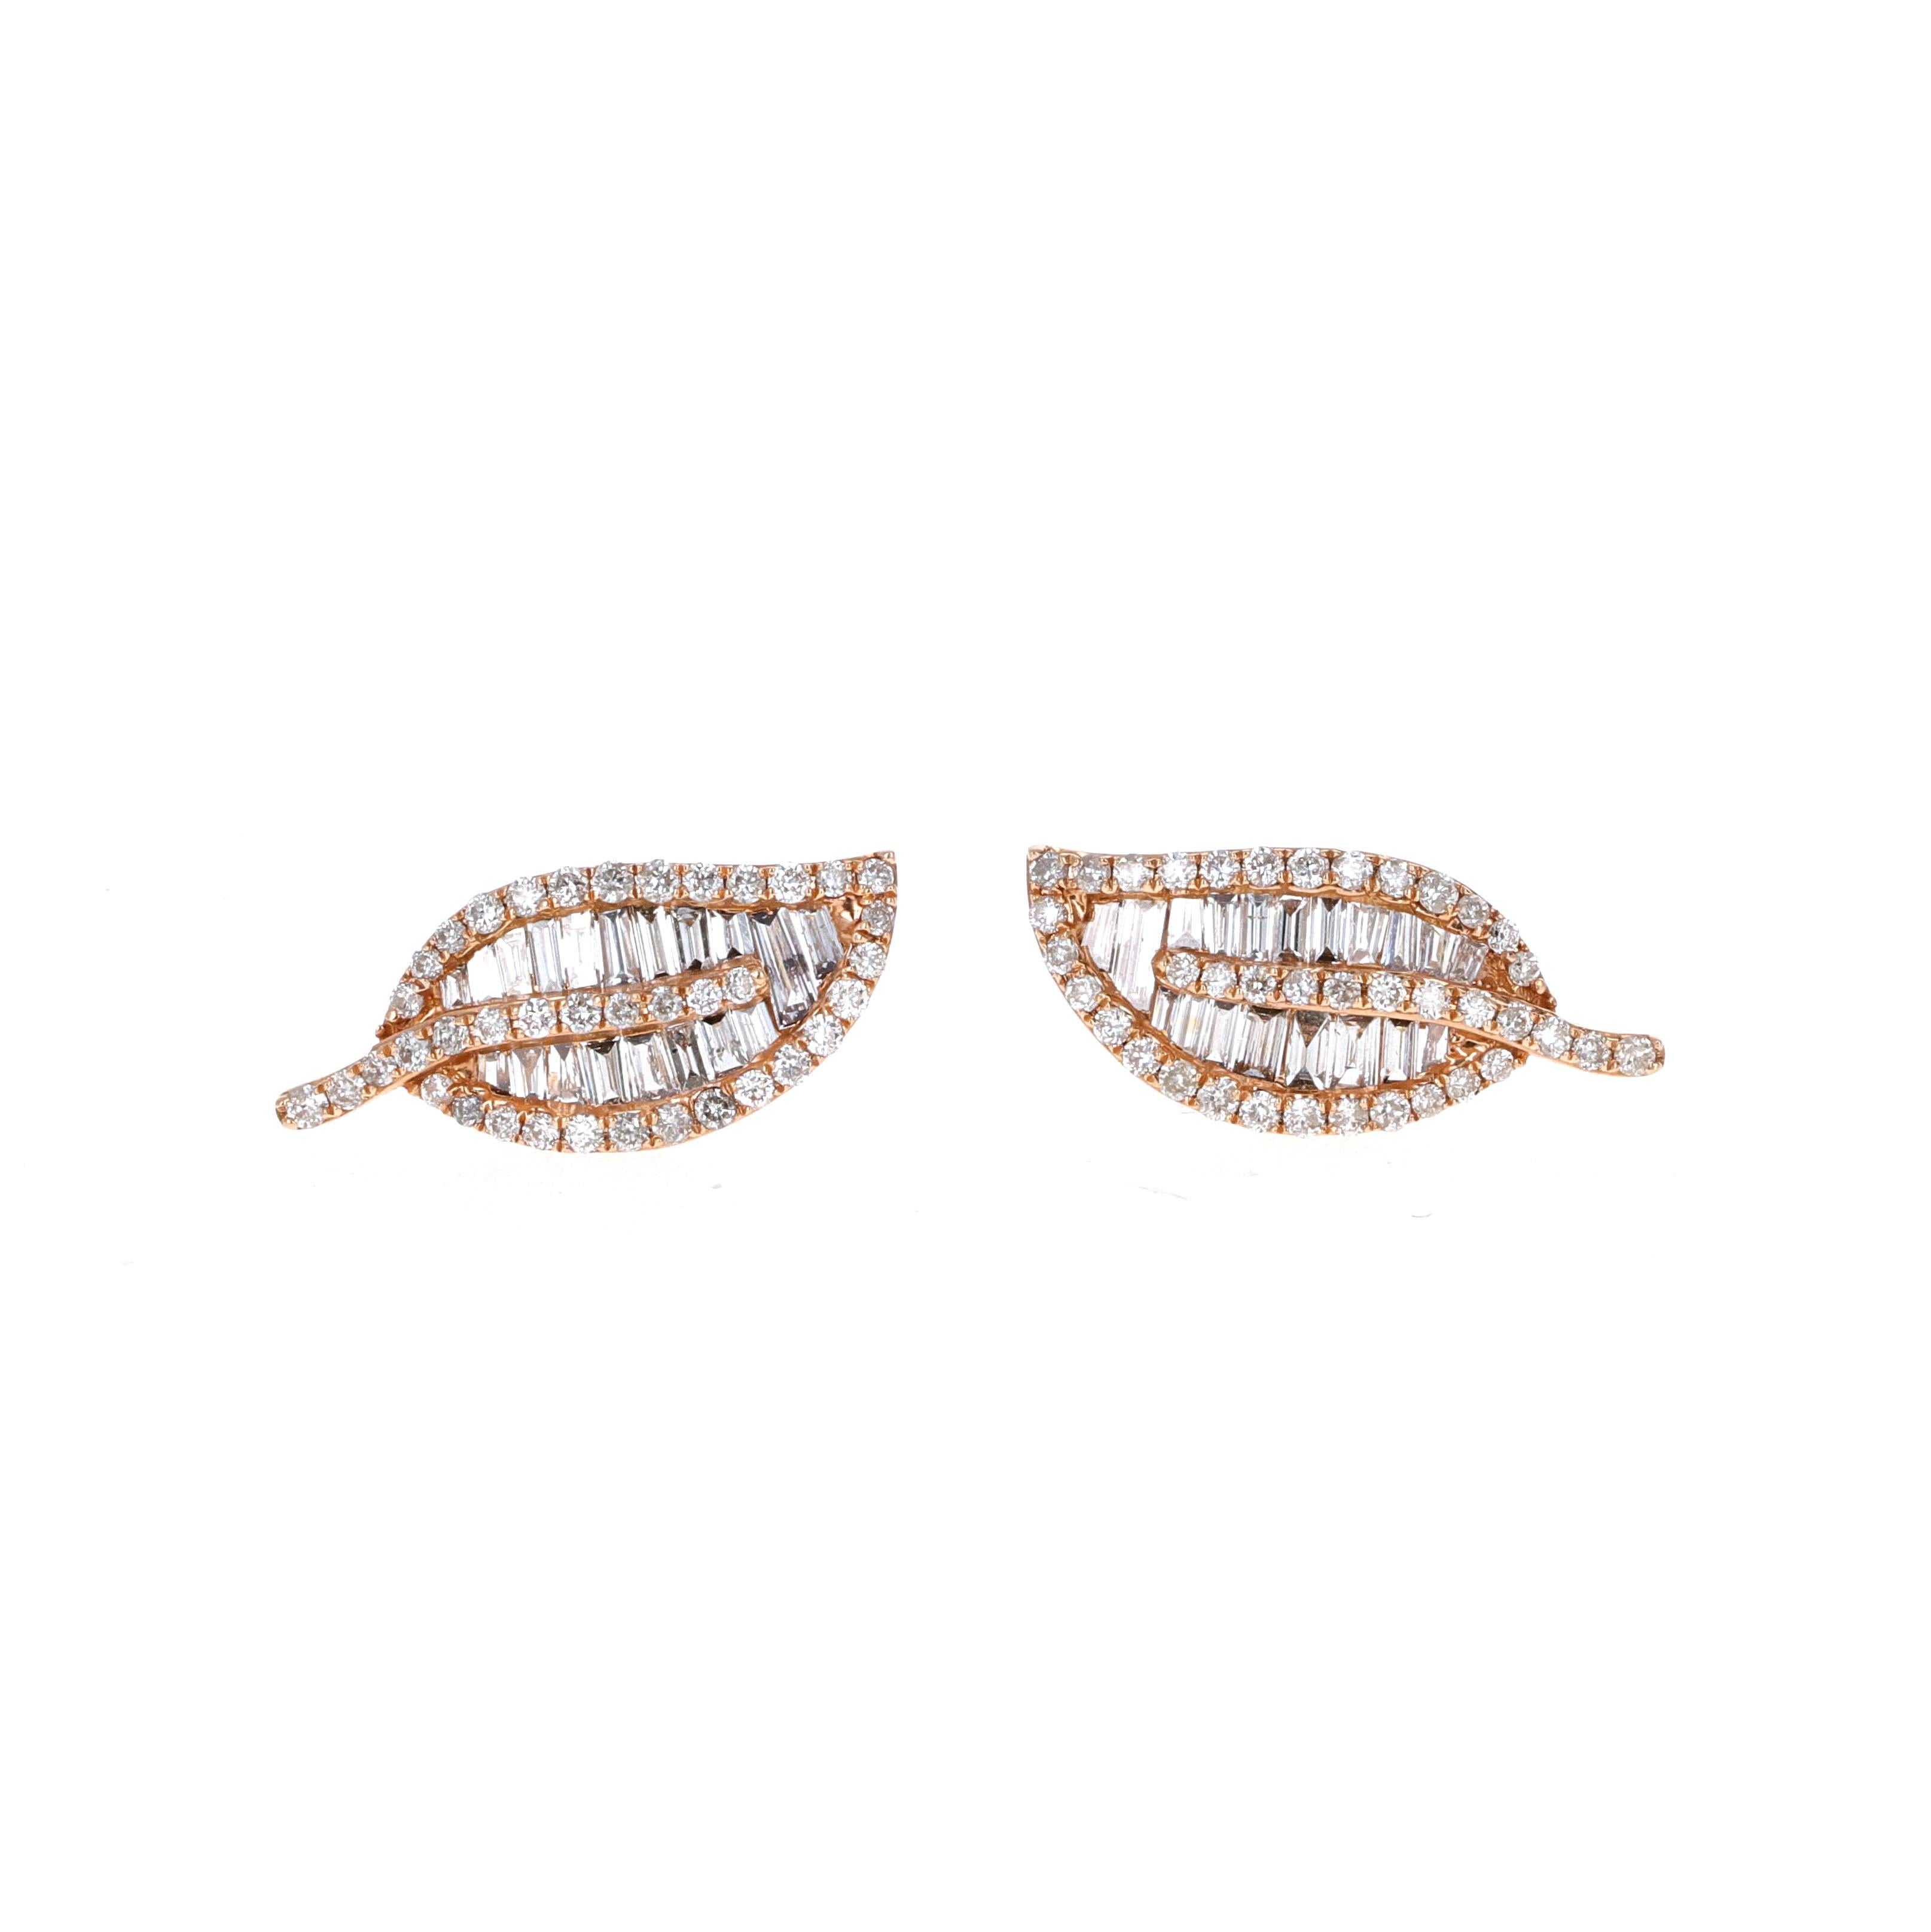 18 karat rose gold diamond leaf stud earrings. The earrings are made with baguette and round shape diamonds. There is a total of 1 carat in diamonds. 